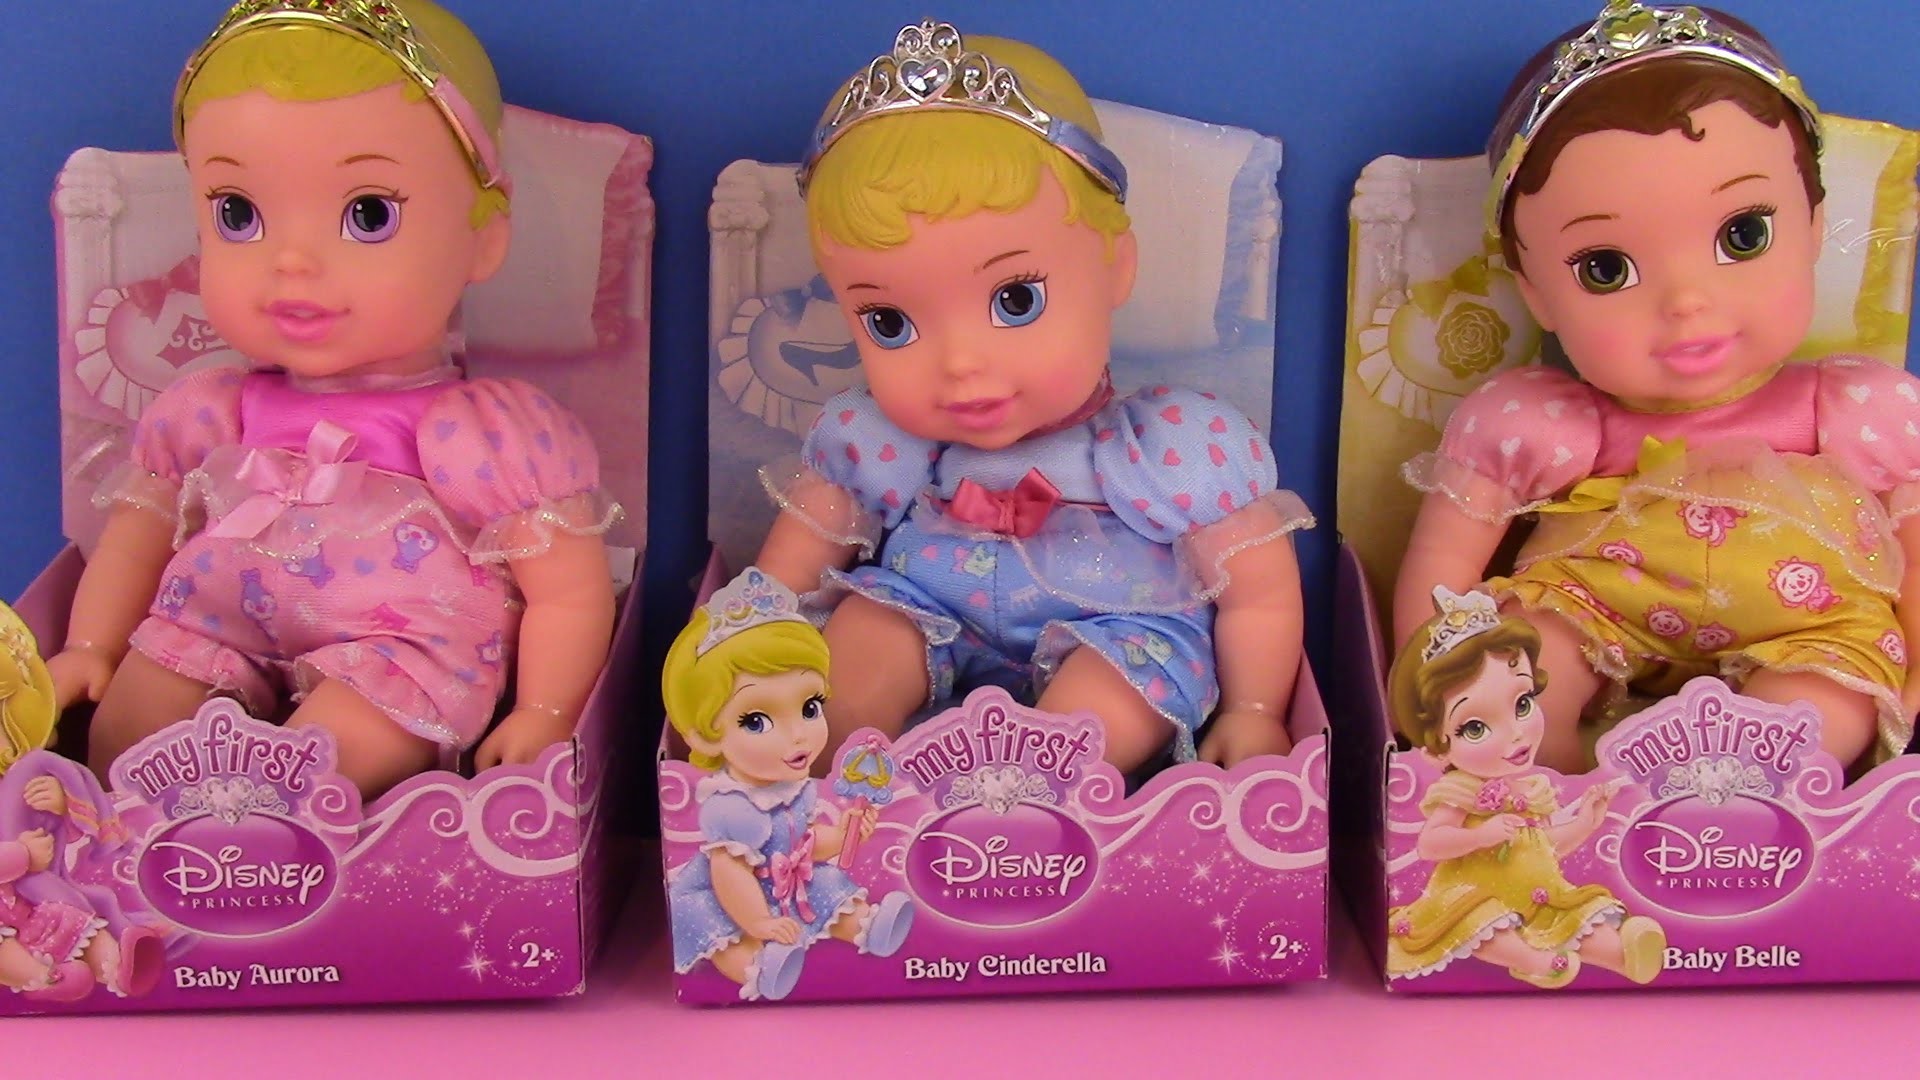 1920x1080 Disney Princess Babies Dolls! Baby Aurora, Cinderella and Belle! TOYS FOR  BABY AND TODDLERS - YouTube